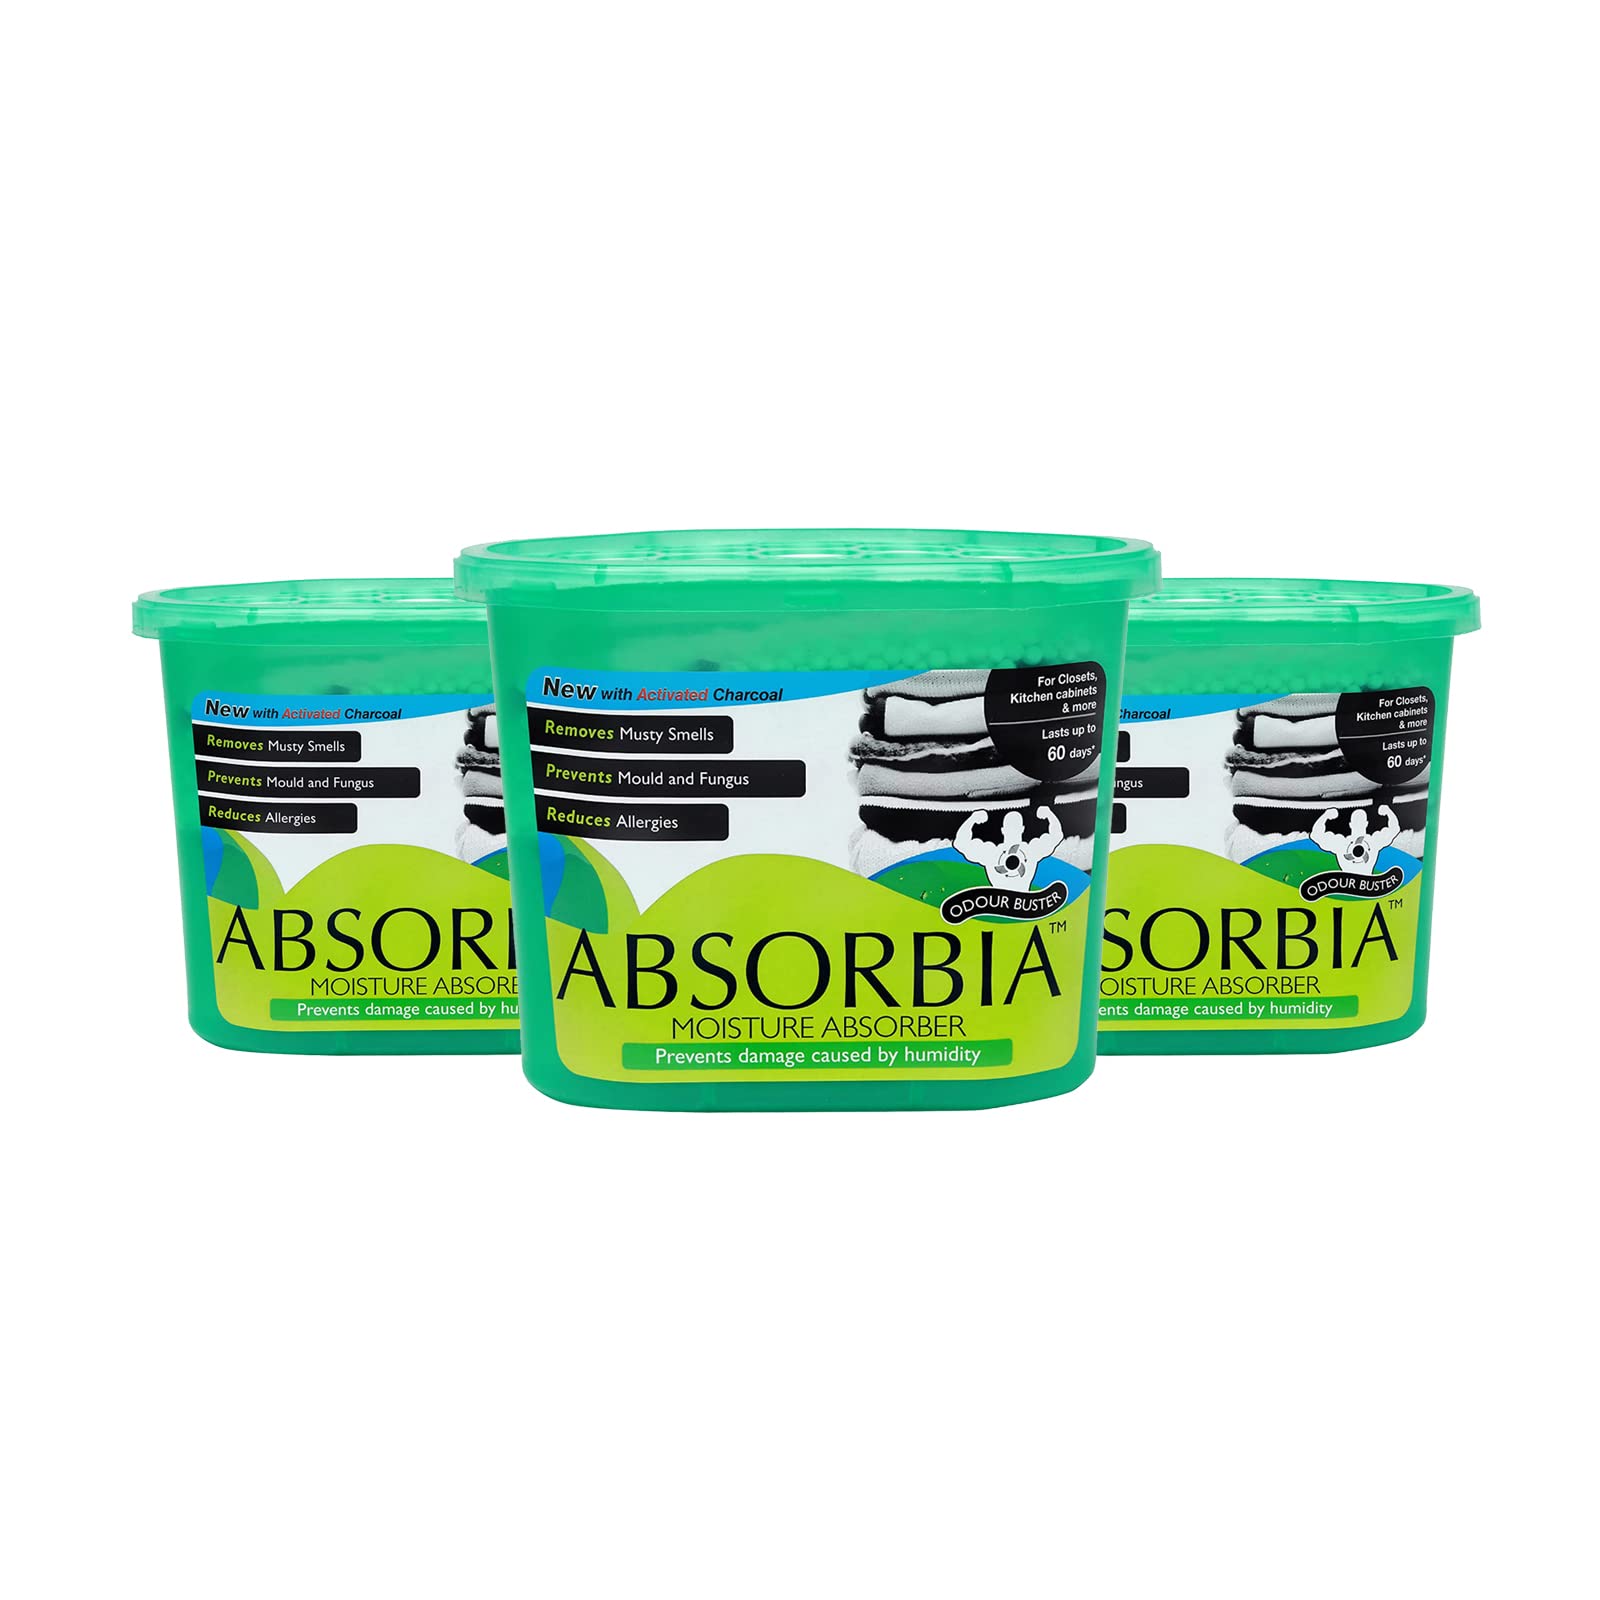 Absorbia Moisture Absorber & Odour Buster with Activated Charcoal |Family Pack of 3 (300 gms X 3 Boxes) |Absorption Capacity 600ml Each Box |for Wardrobe etc |Fights Against Mould & Musty smells